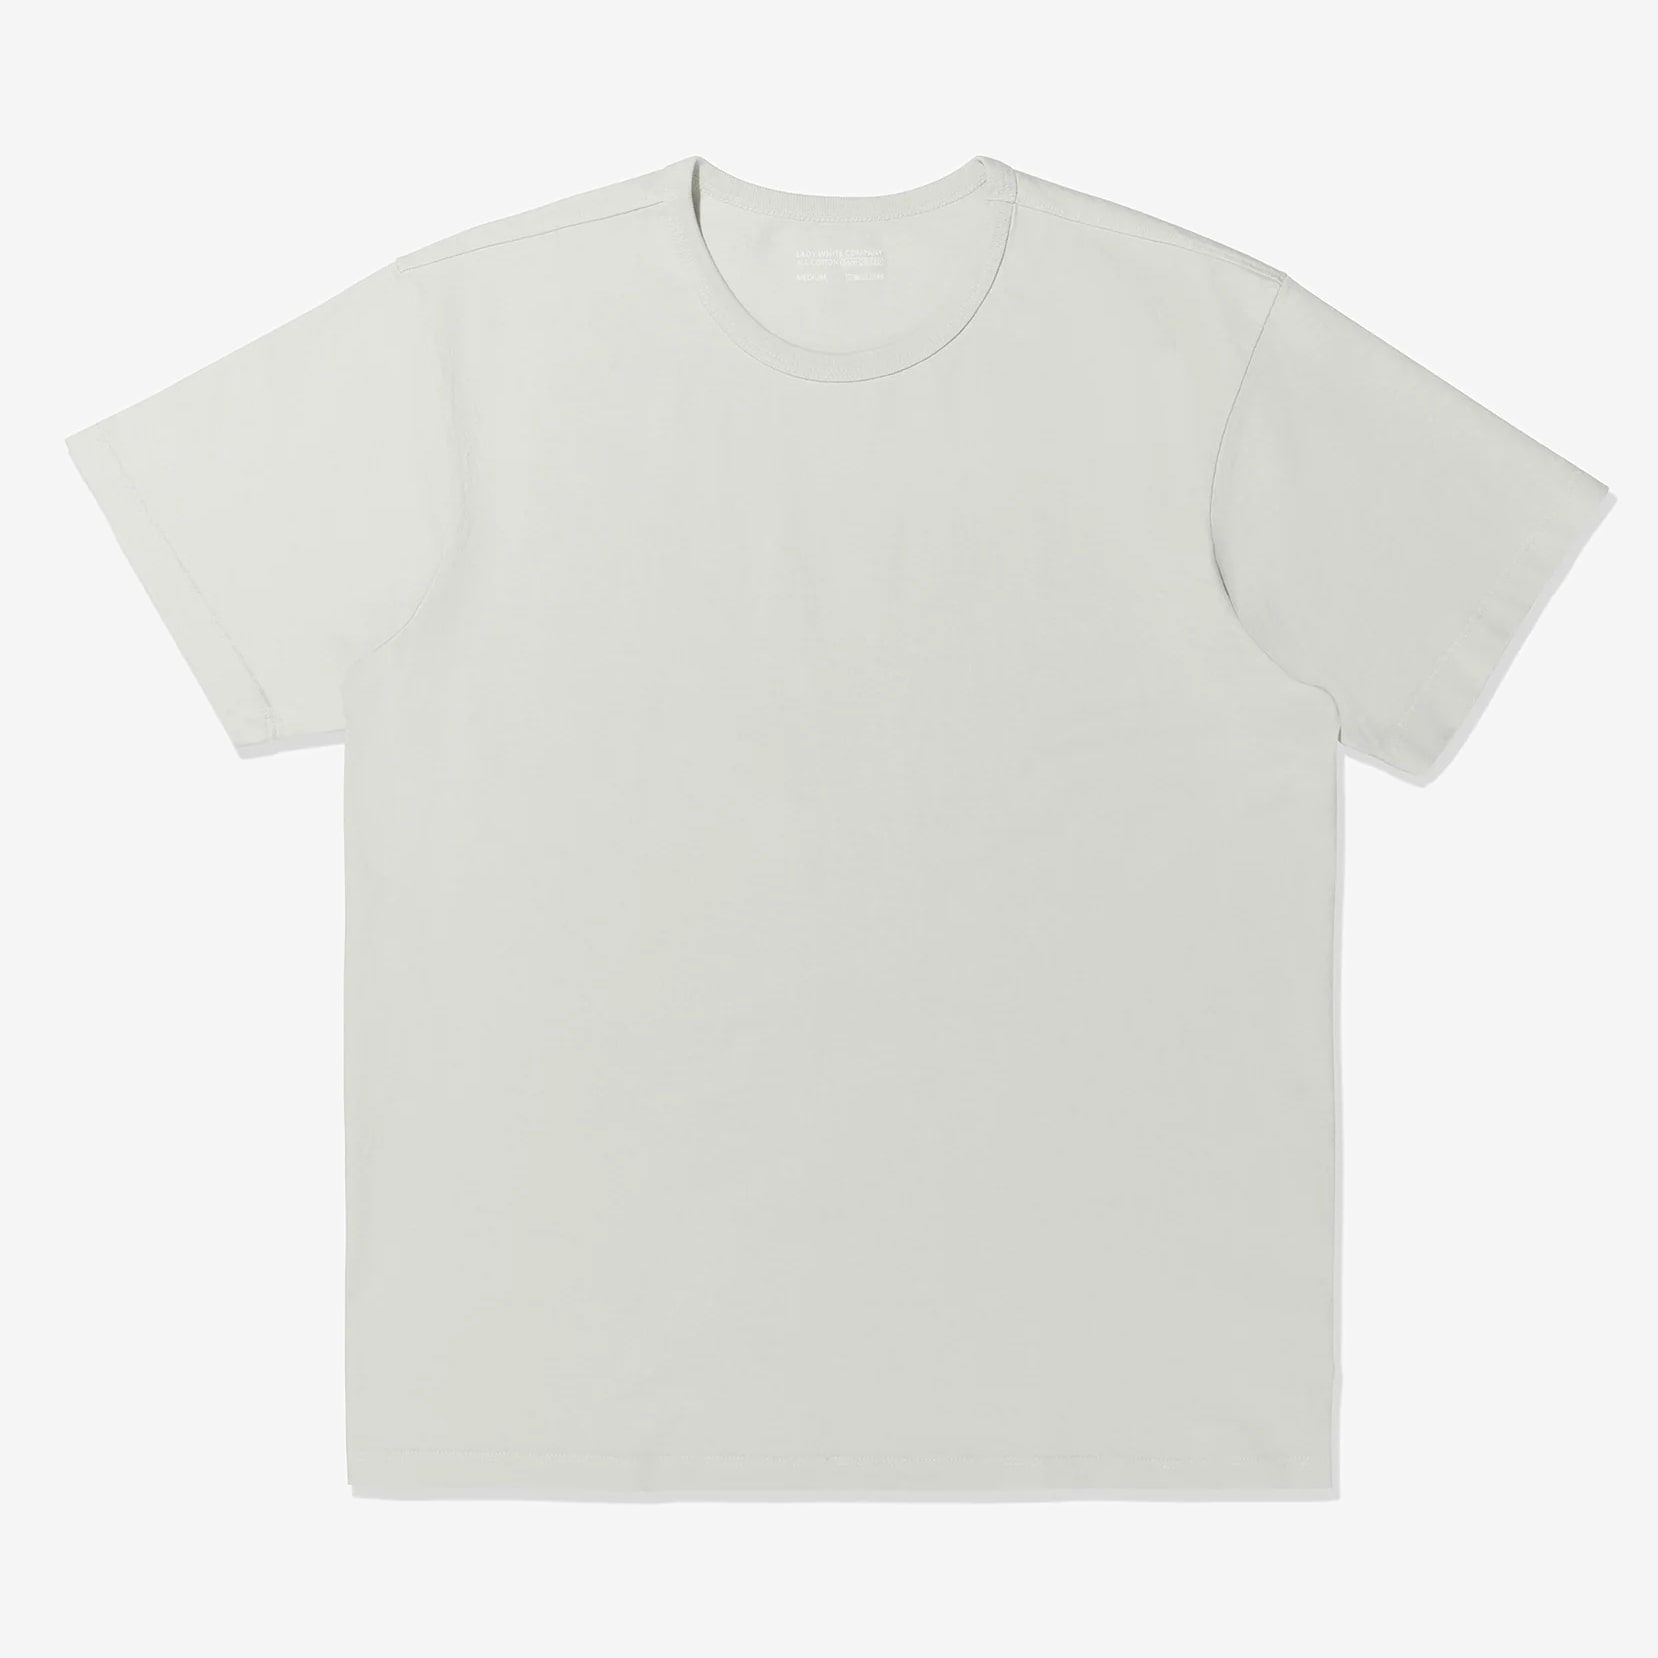 Lady White Co - T-SHIRT 2-PACK (OFF WHITE)